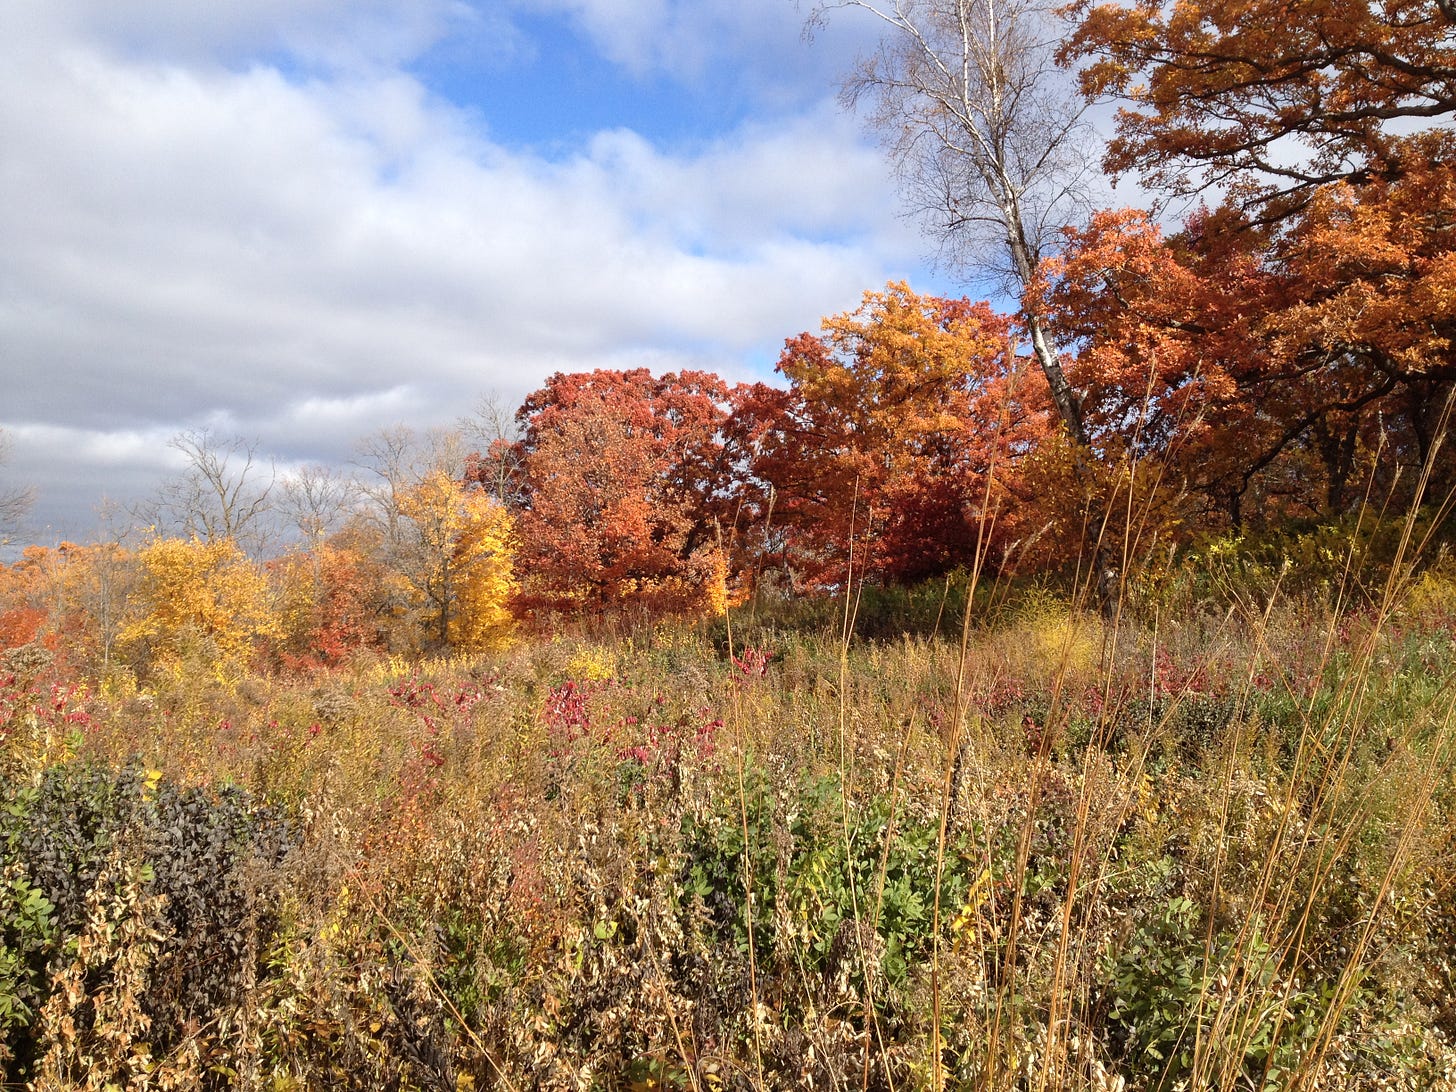 Photo of a hillside in fall with grassess and trees in shades of red, orange, and yellow